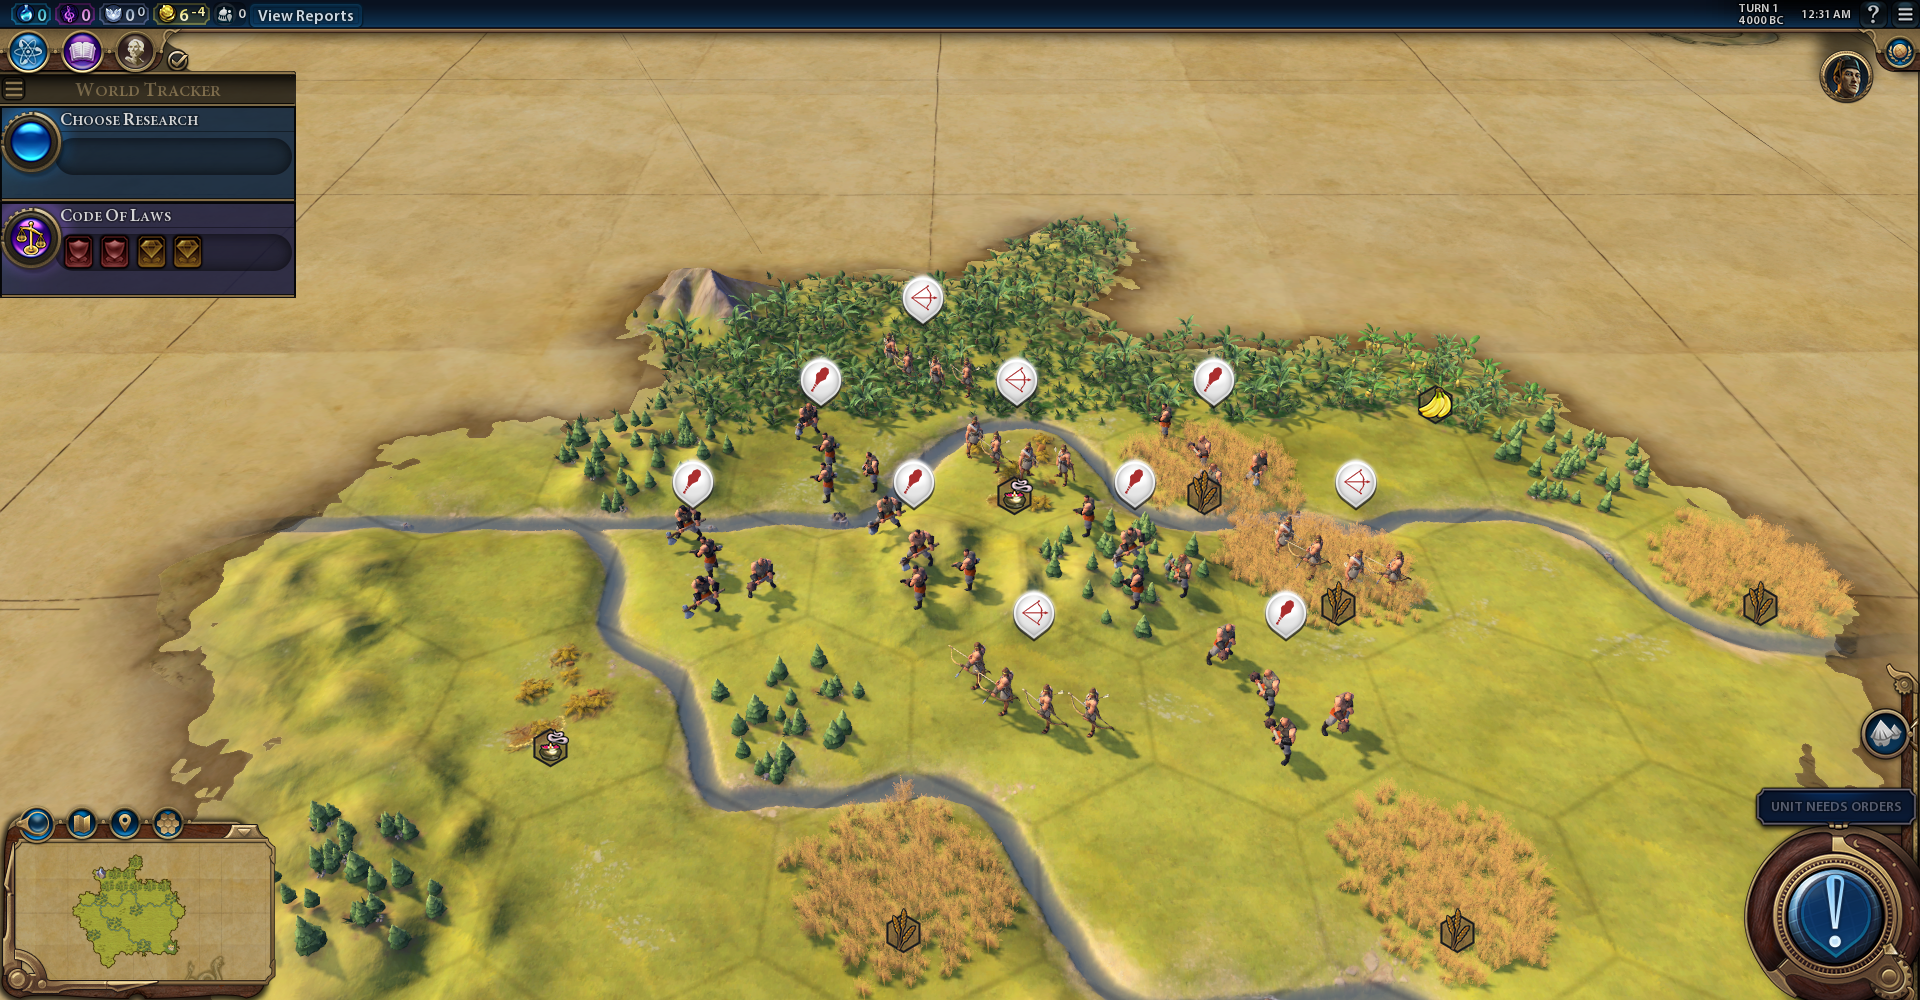 civ 6 mods: adjust starting units, techs, and more